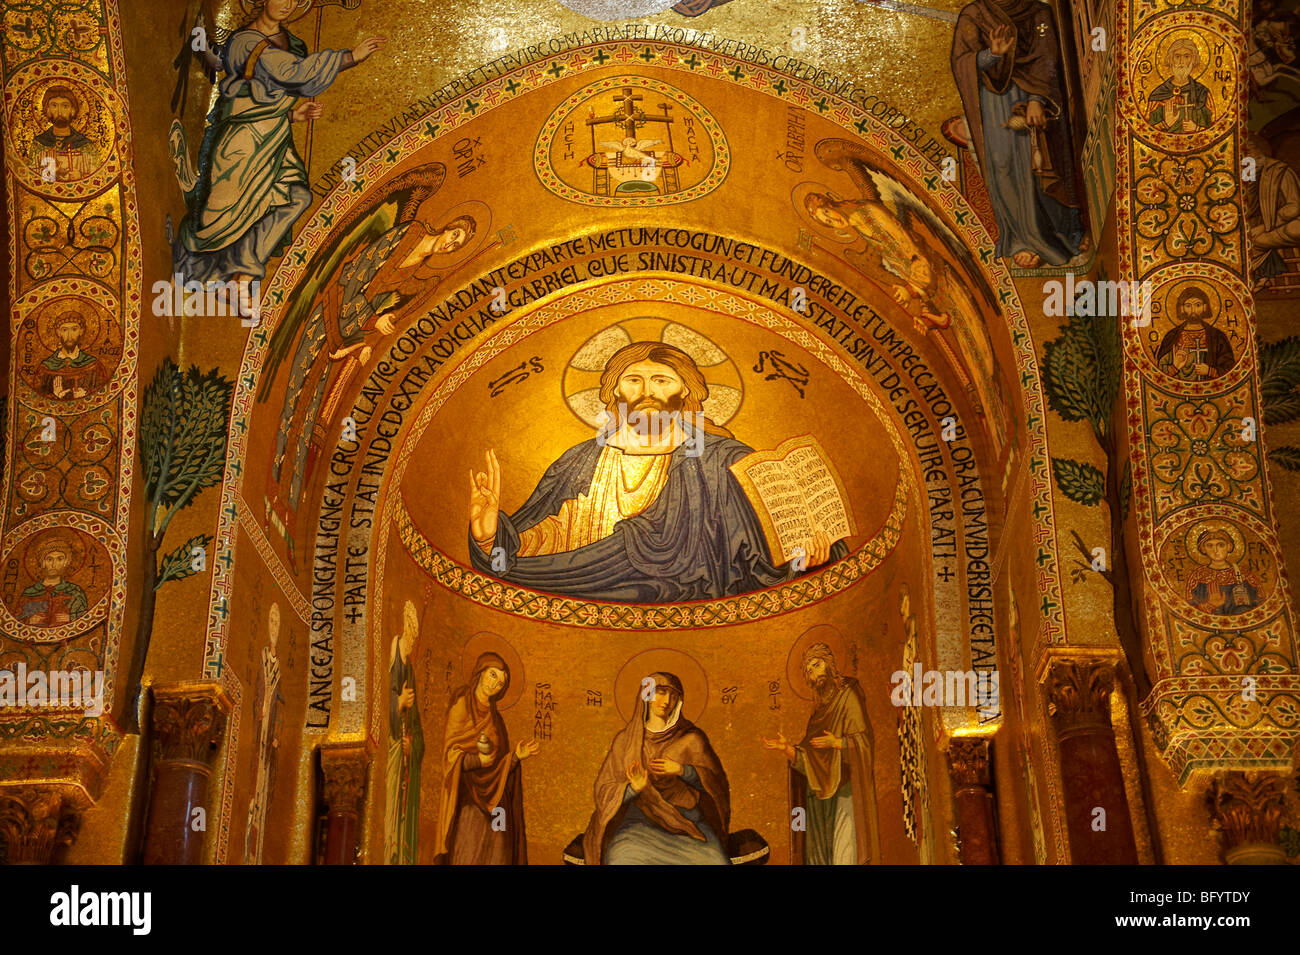 Christ with mary below. Byzantine mosaics ot The Palatine Chapel in the Norman Palace, Palermo Sicily Stock Photo